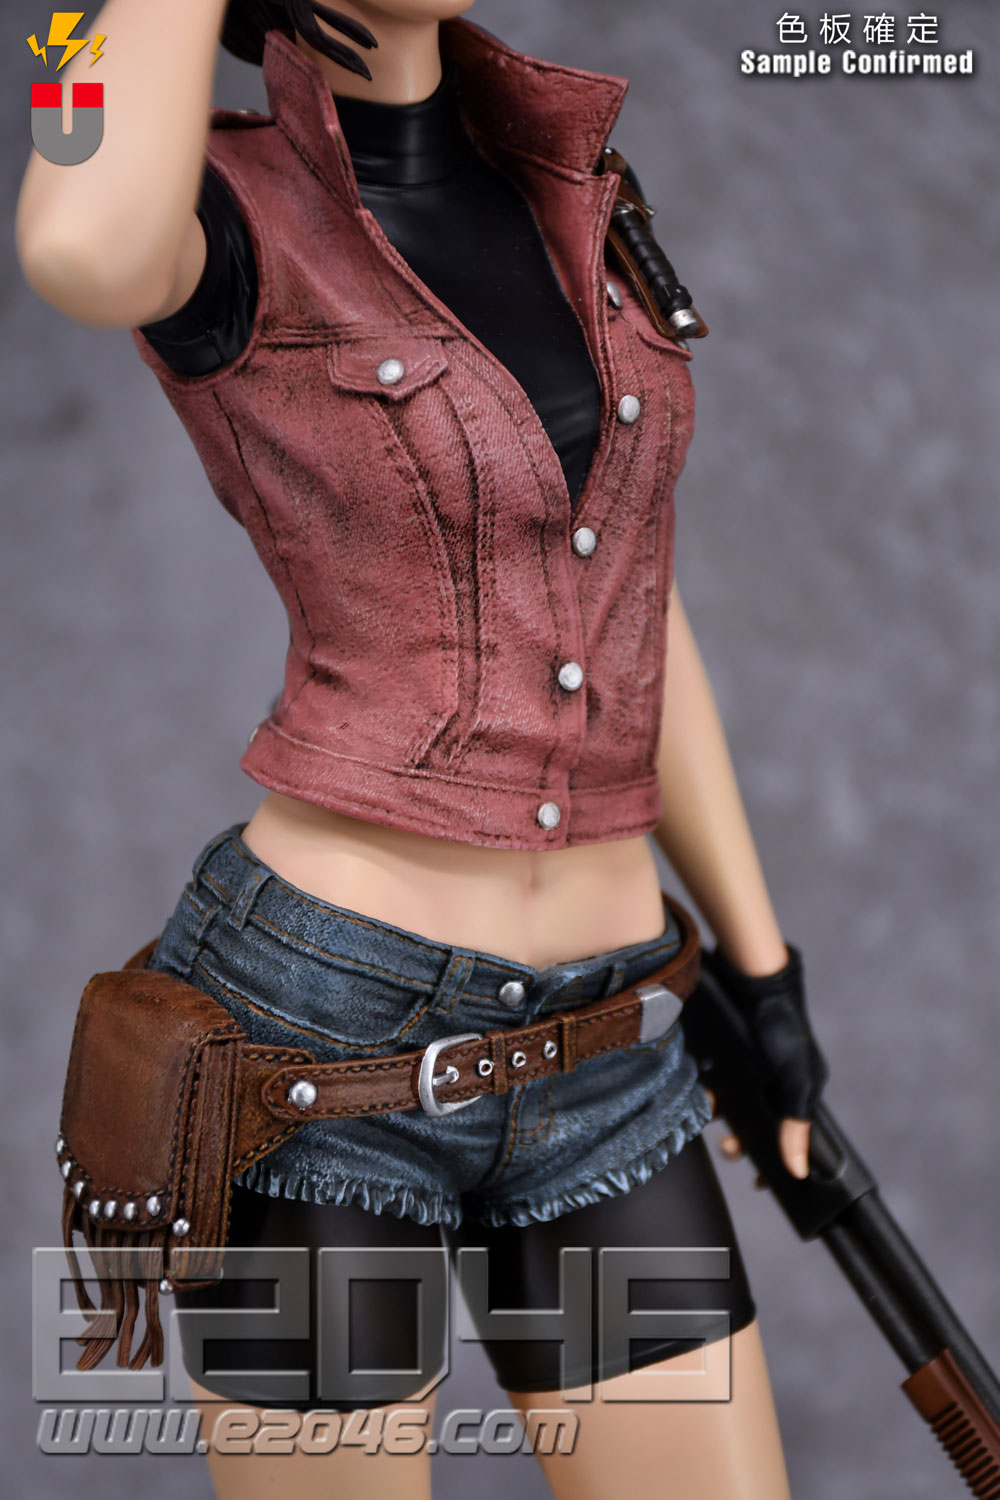 Claire Redfield (Pre-painted)